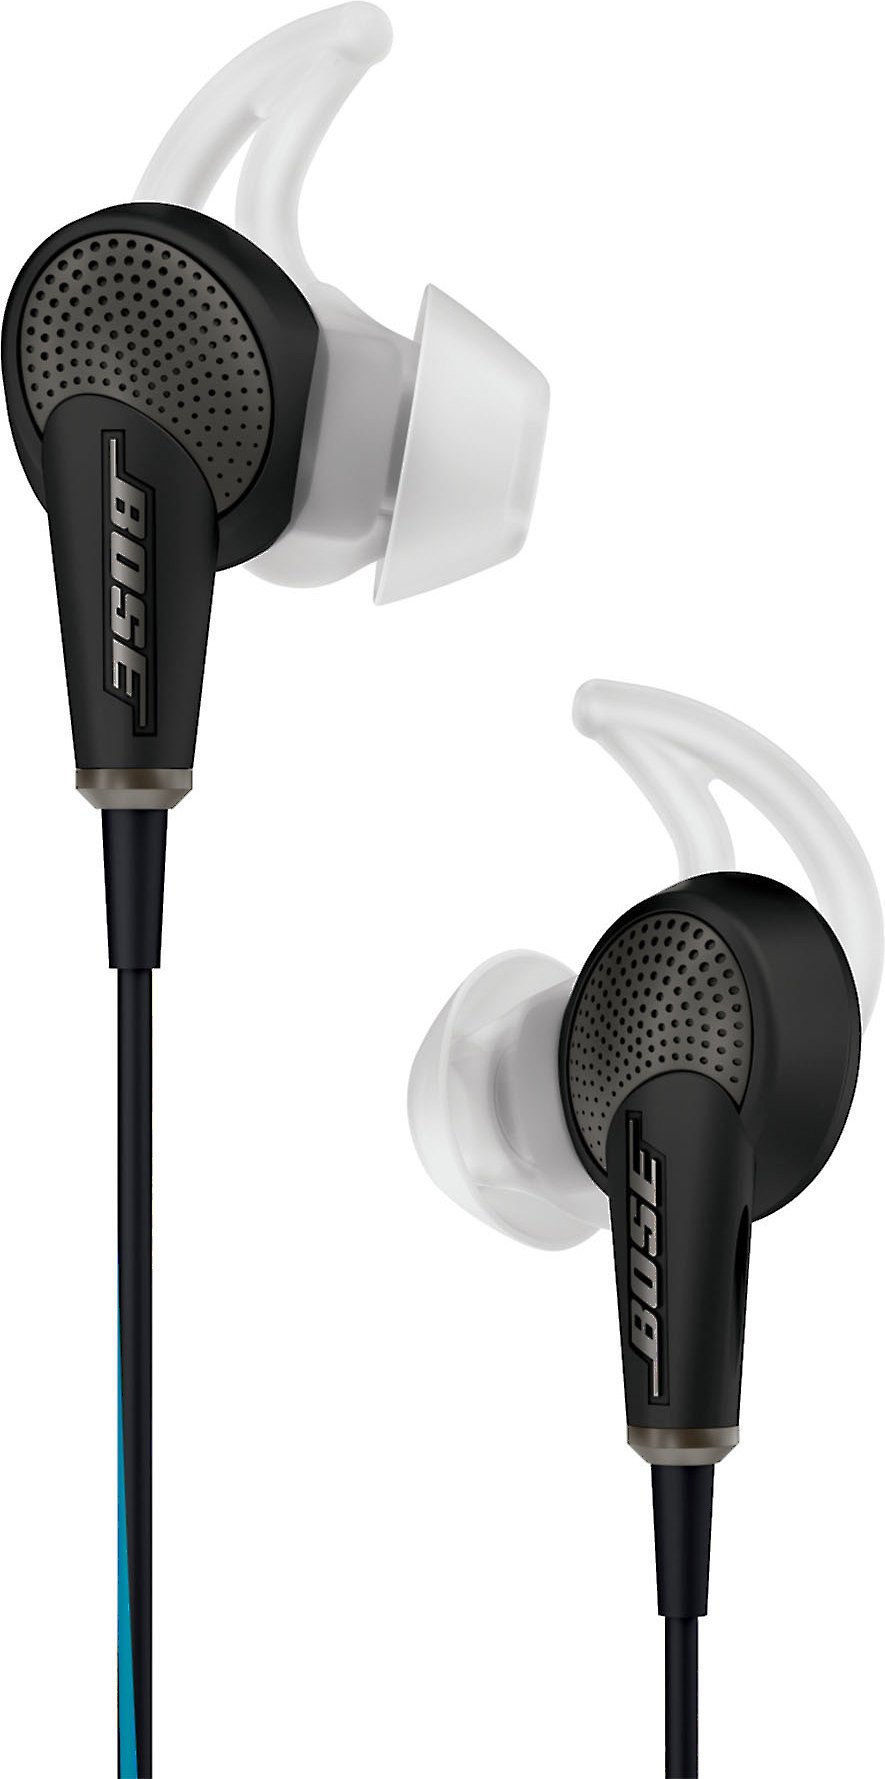 Customer Reviews: Bose® QuietComfort® 20 Acoustic Noise Cancelling 